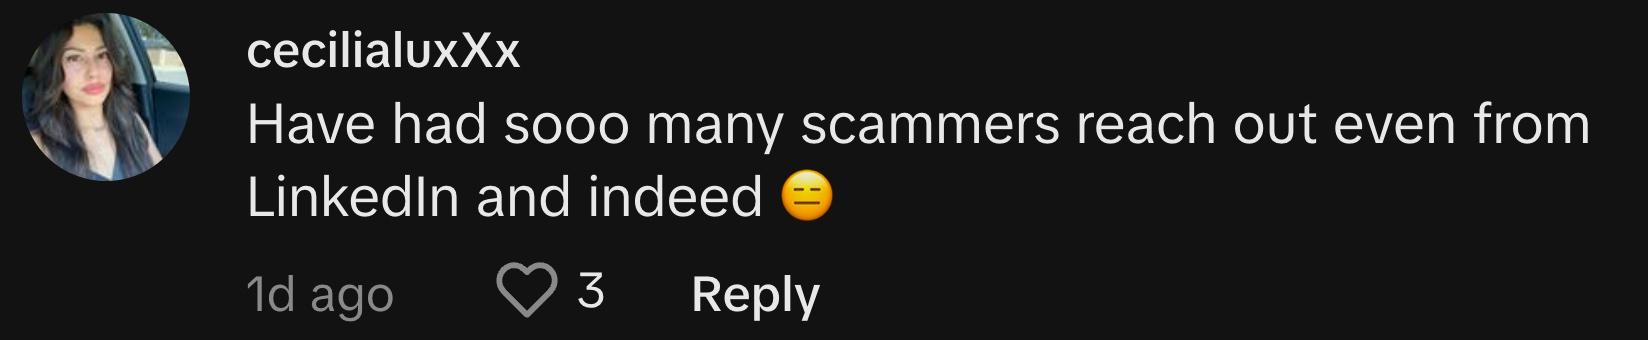 TikToker @cecilialuxxx commented, "Have had sooo many scammers reach out even from LinkedIn and Indeed 😑"